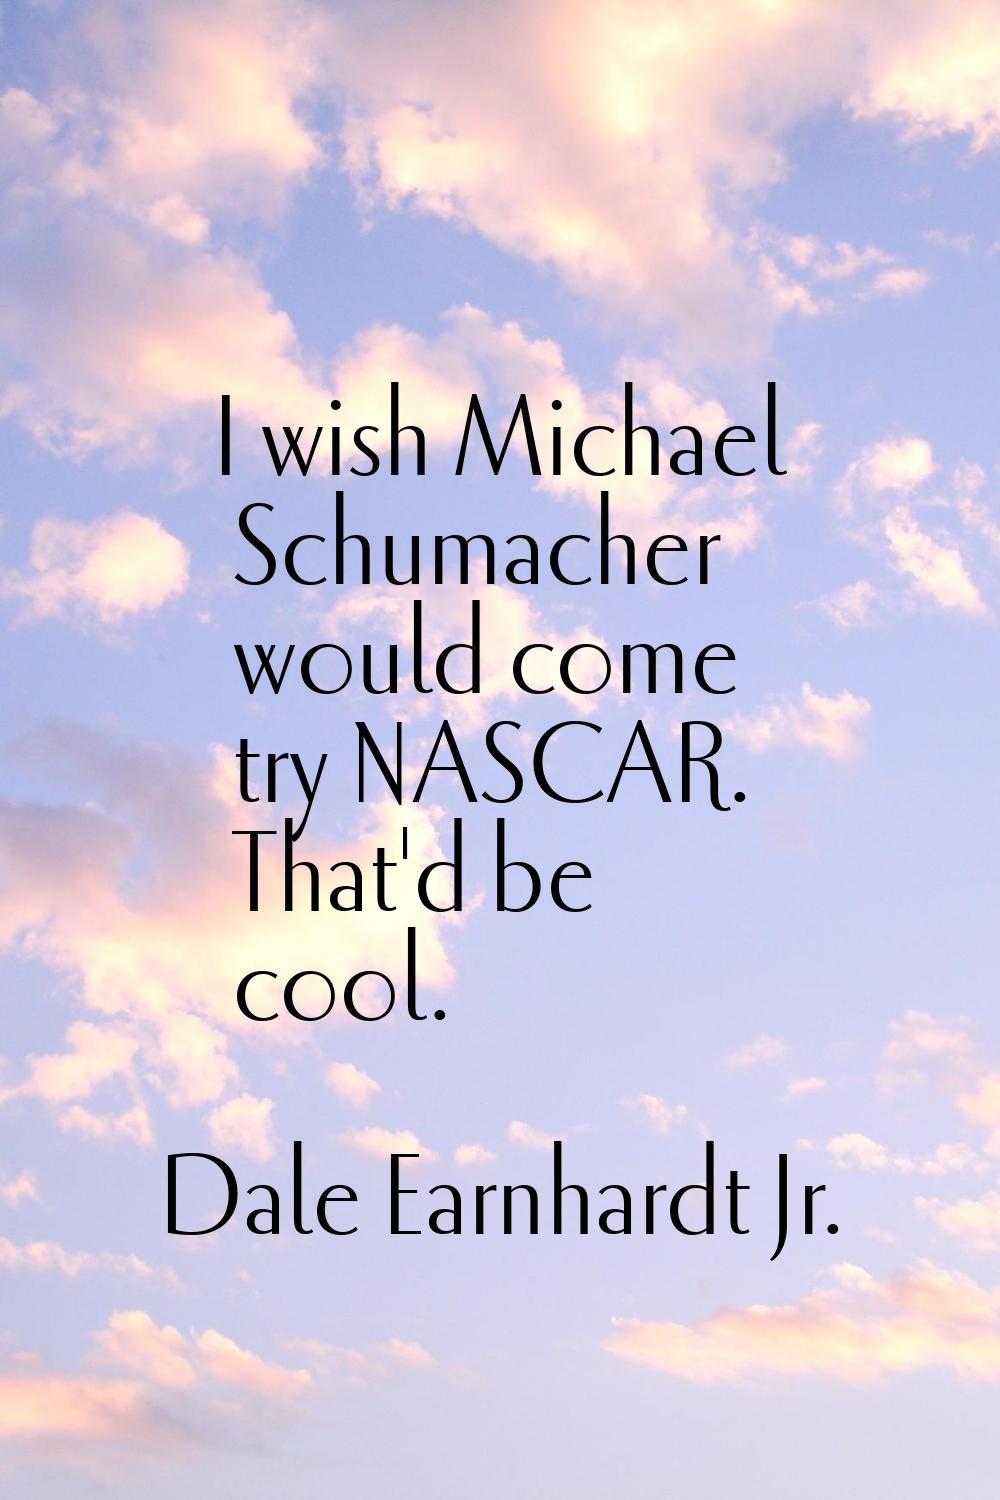 I wish Michael Schumacher would come try NASCAR. That'd be cool.